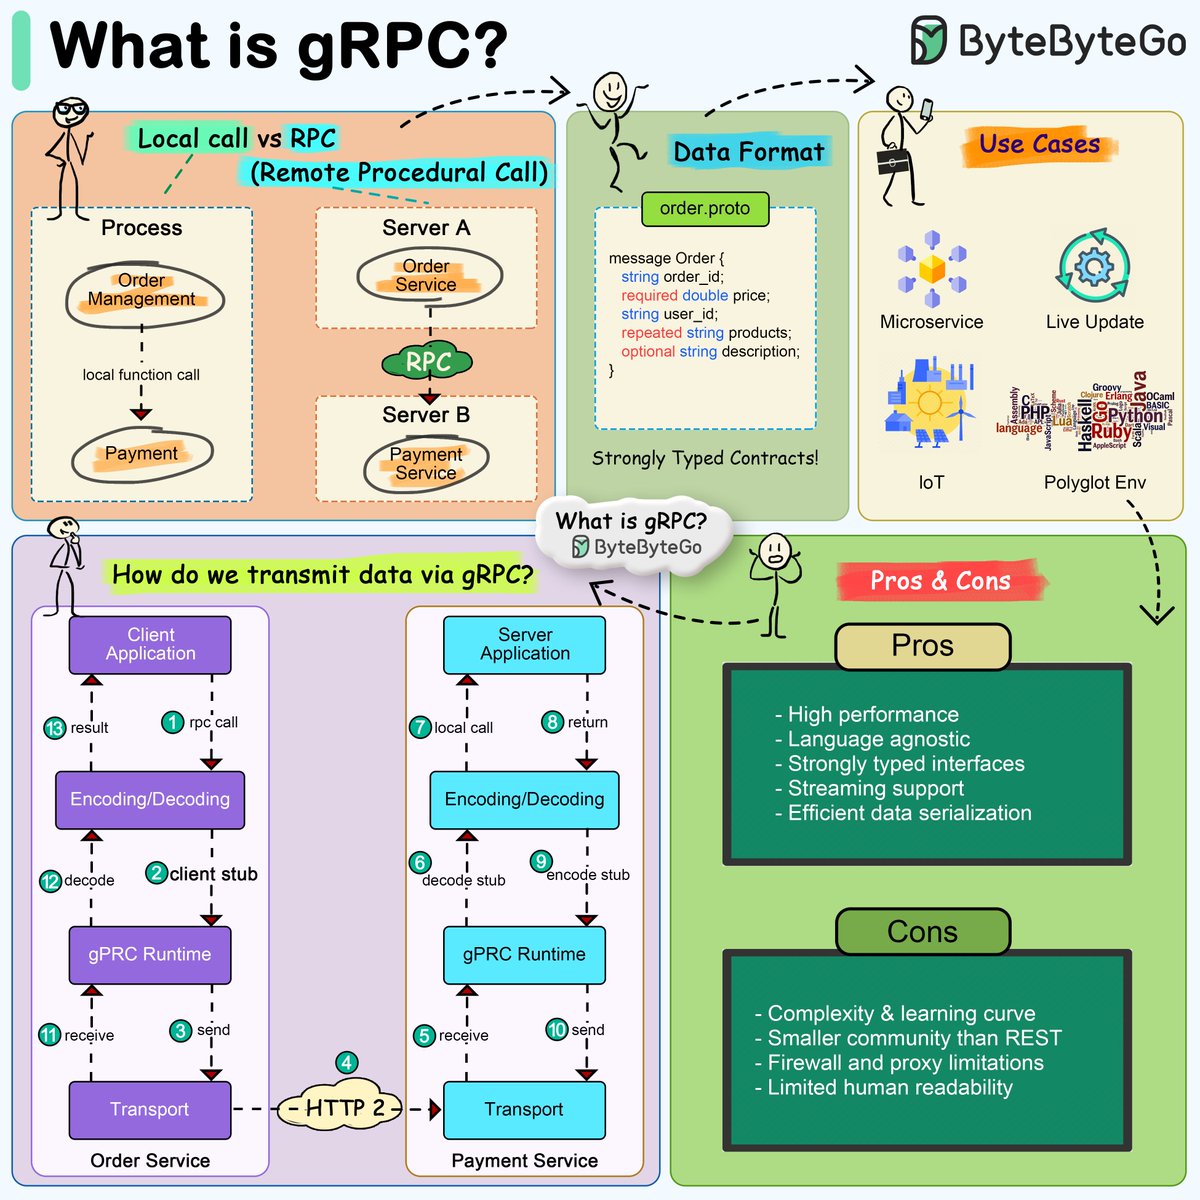 What is gRPC?

gRPC is a high-performance, open-source remote procedure call framework initially developed by Google. It leverages HTTP/2 for transport, Protocol Buffers as the interface description language, and provides features such as authentication, load balancing, and more.